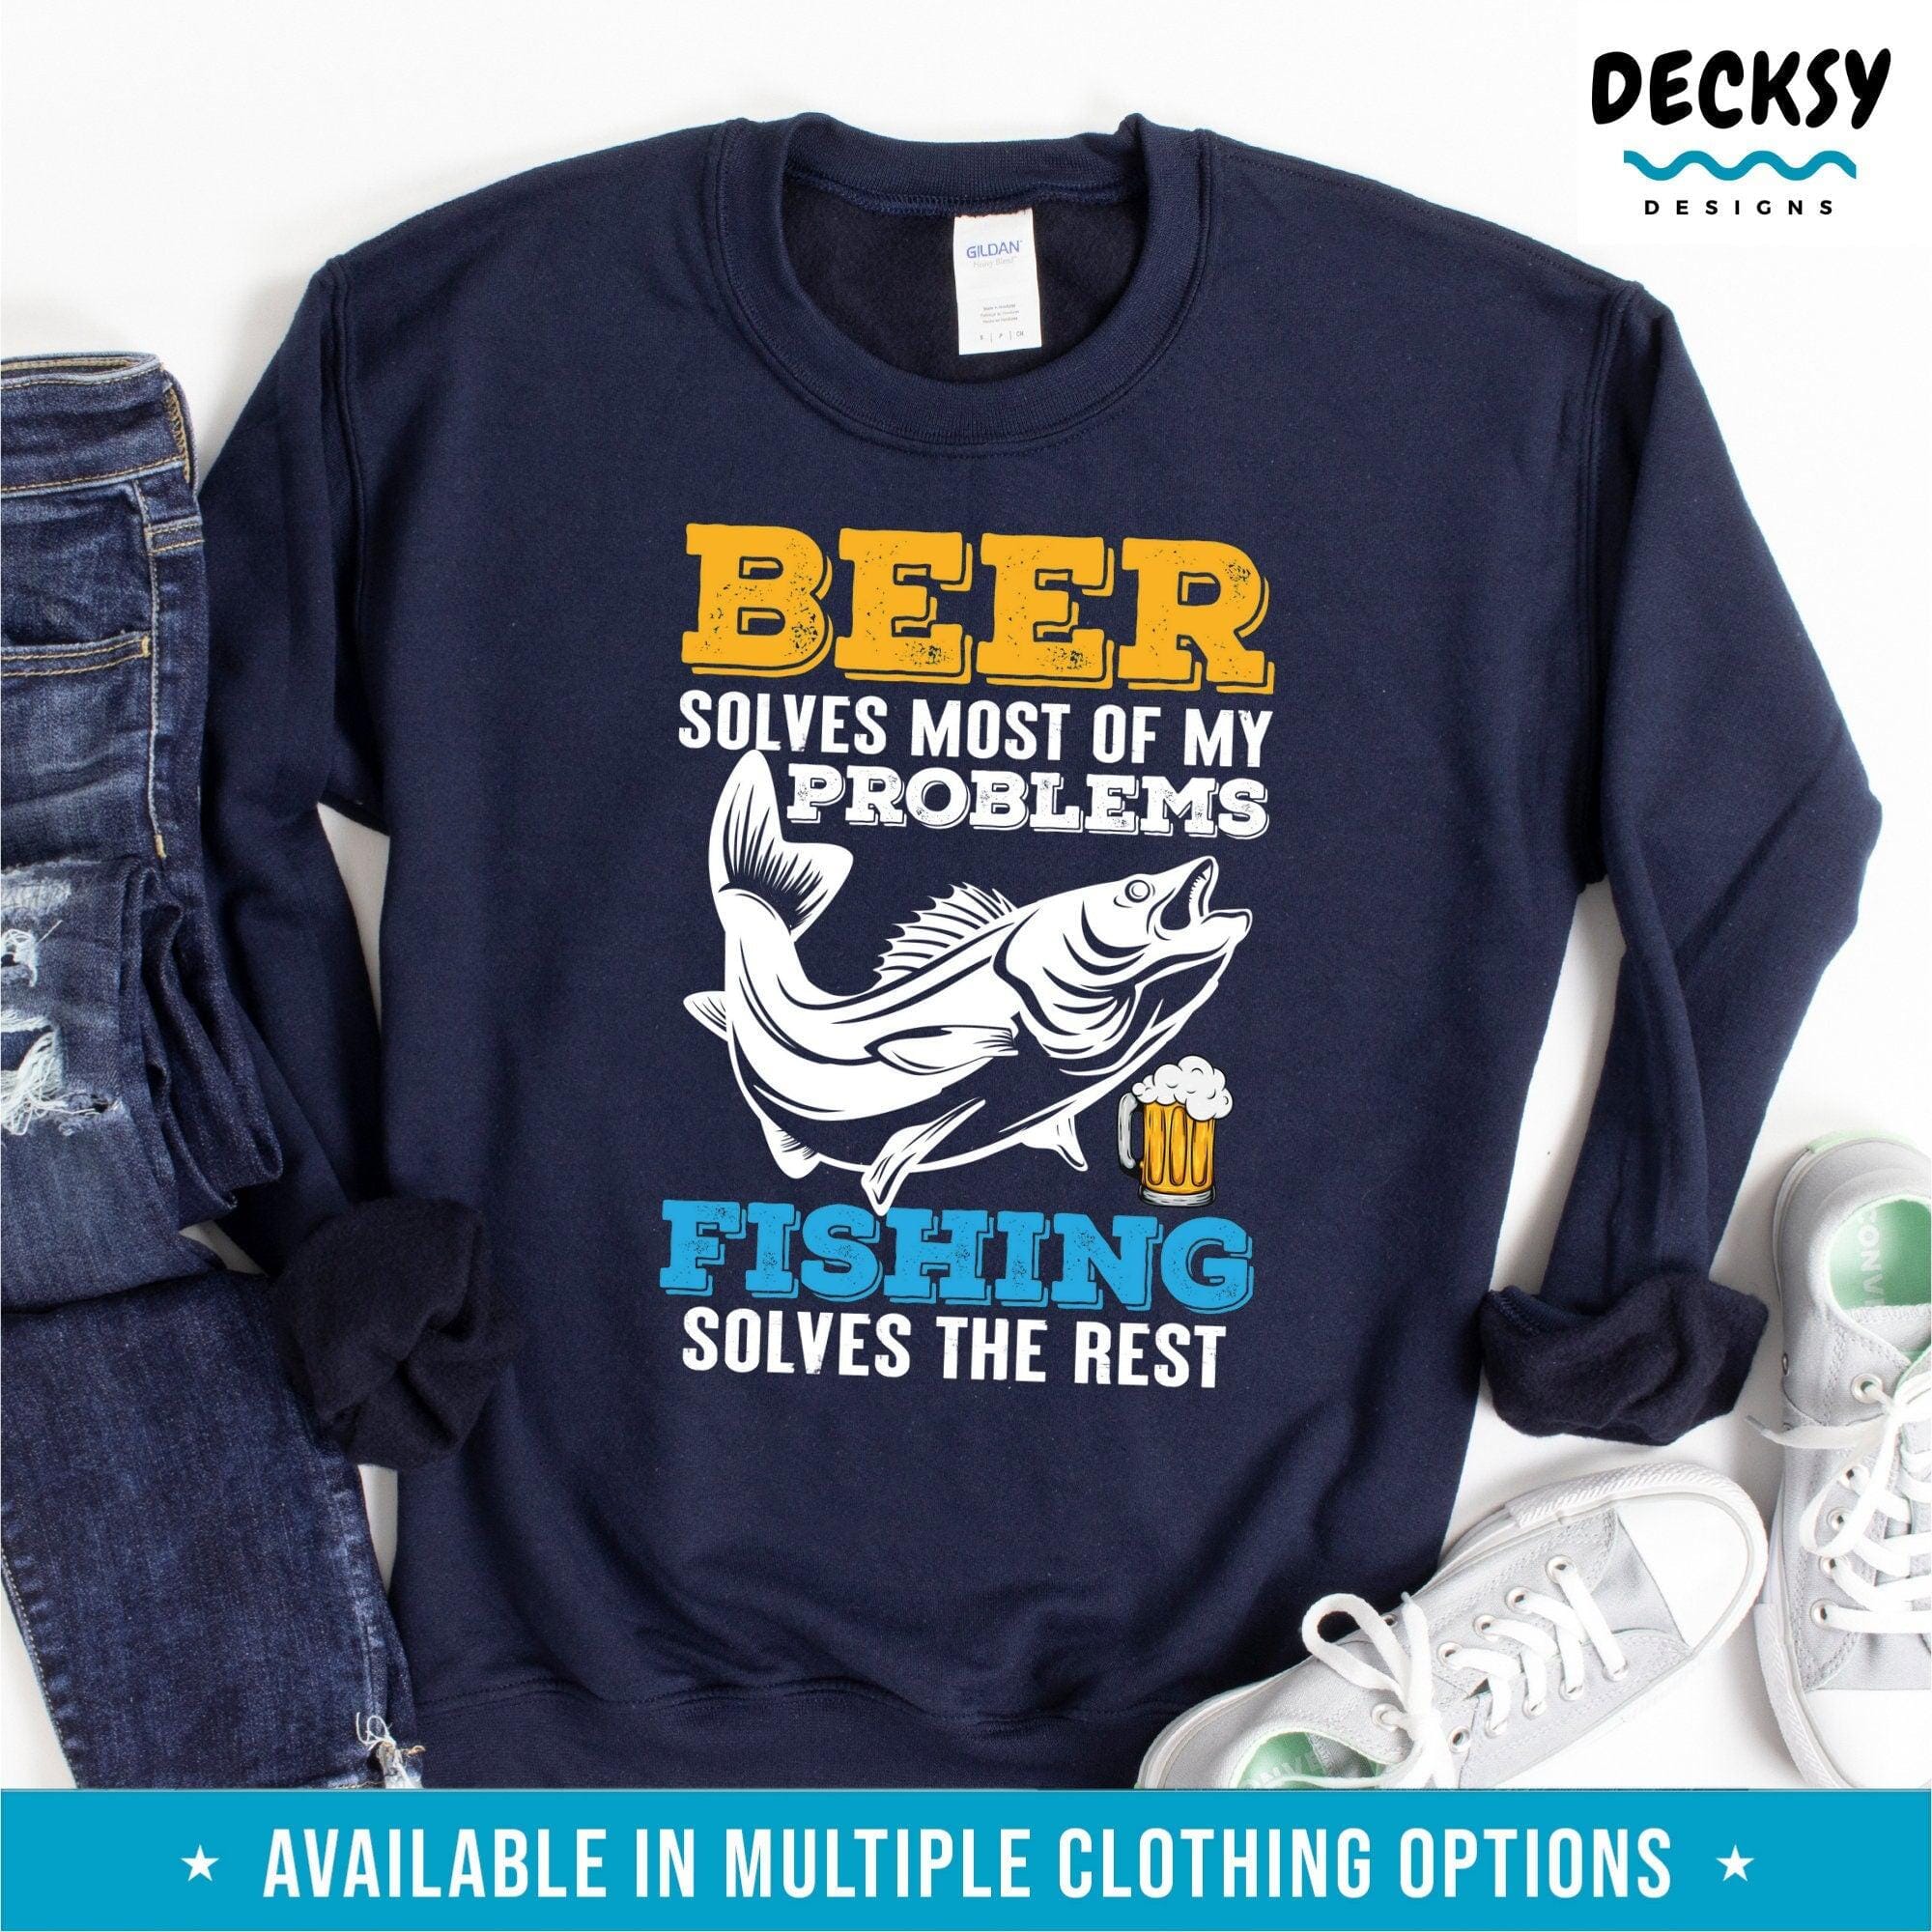 Beer And Fishing Shirt, Fishing Gift-Clothing:Gender-Neutral Adult Clothing:Tops & Tees:T-shirts:Graphic Tees-DecksyDesigns